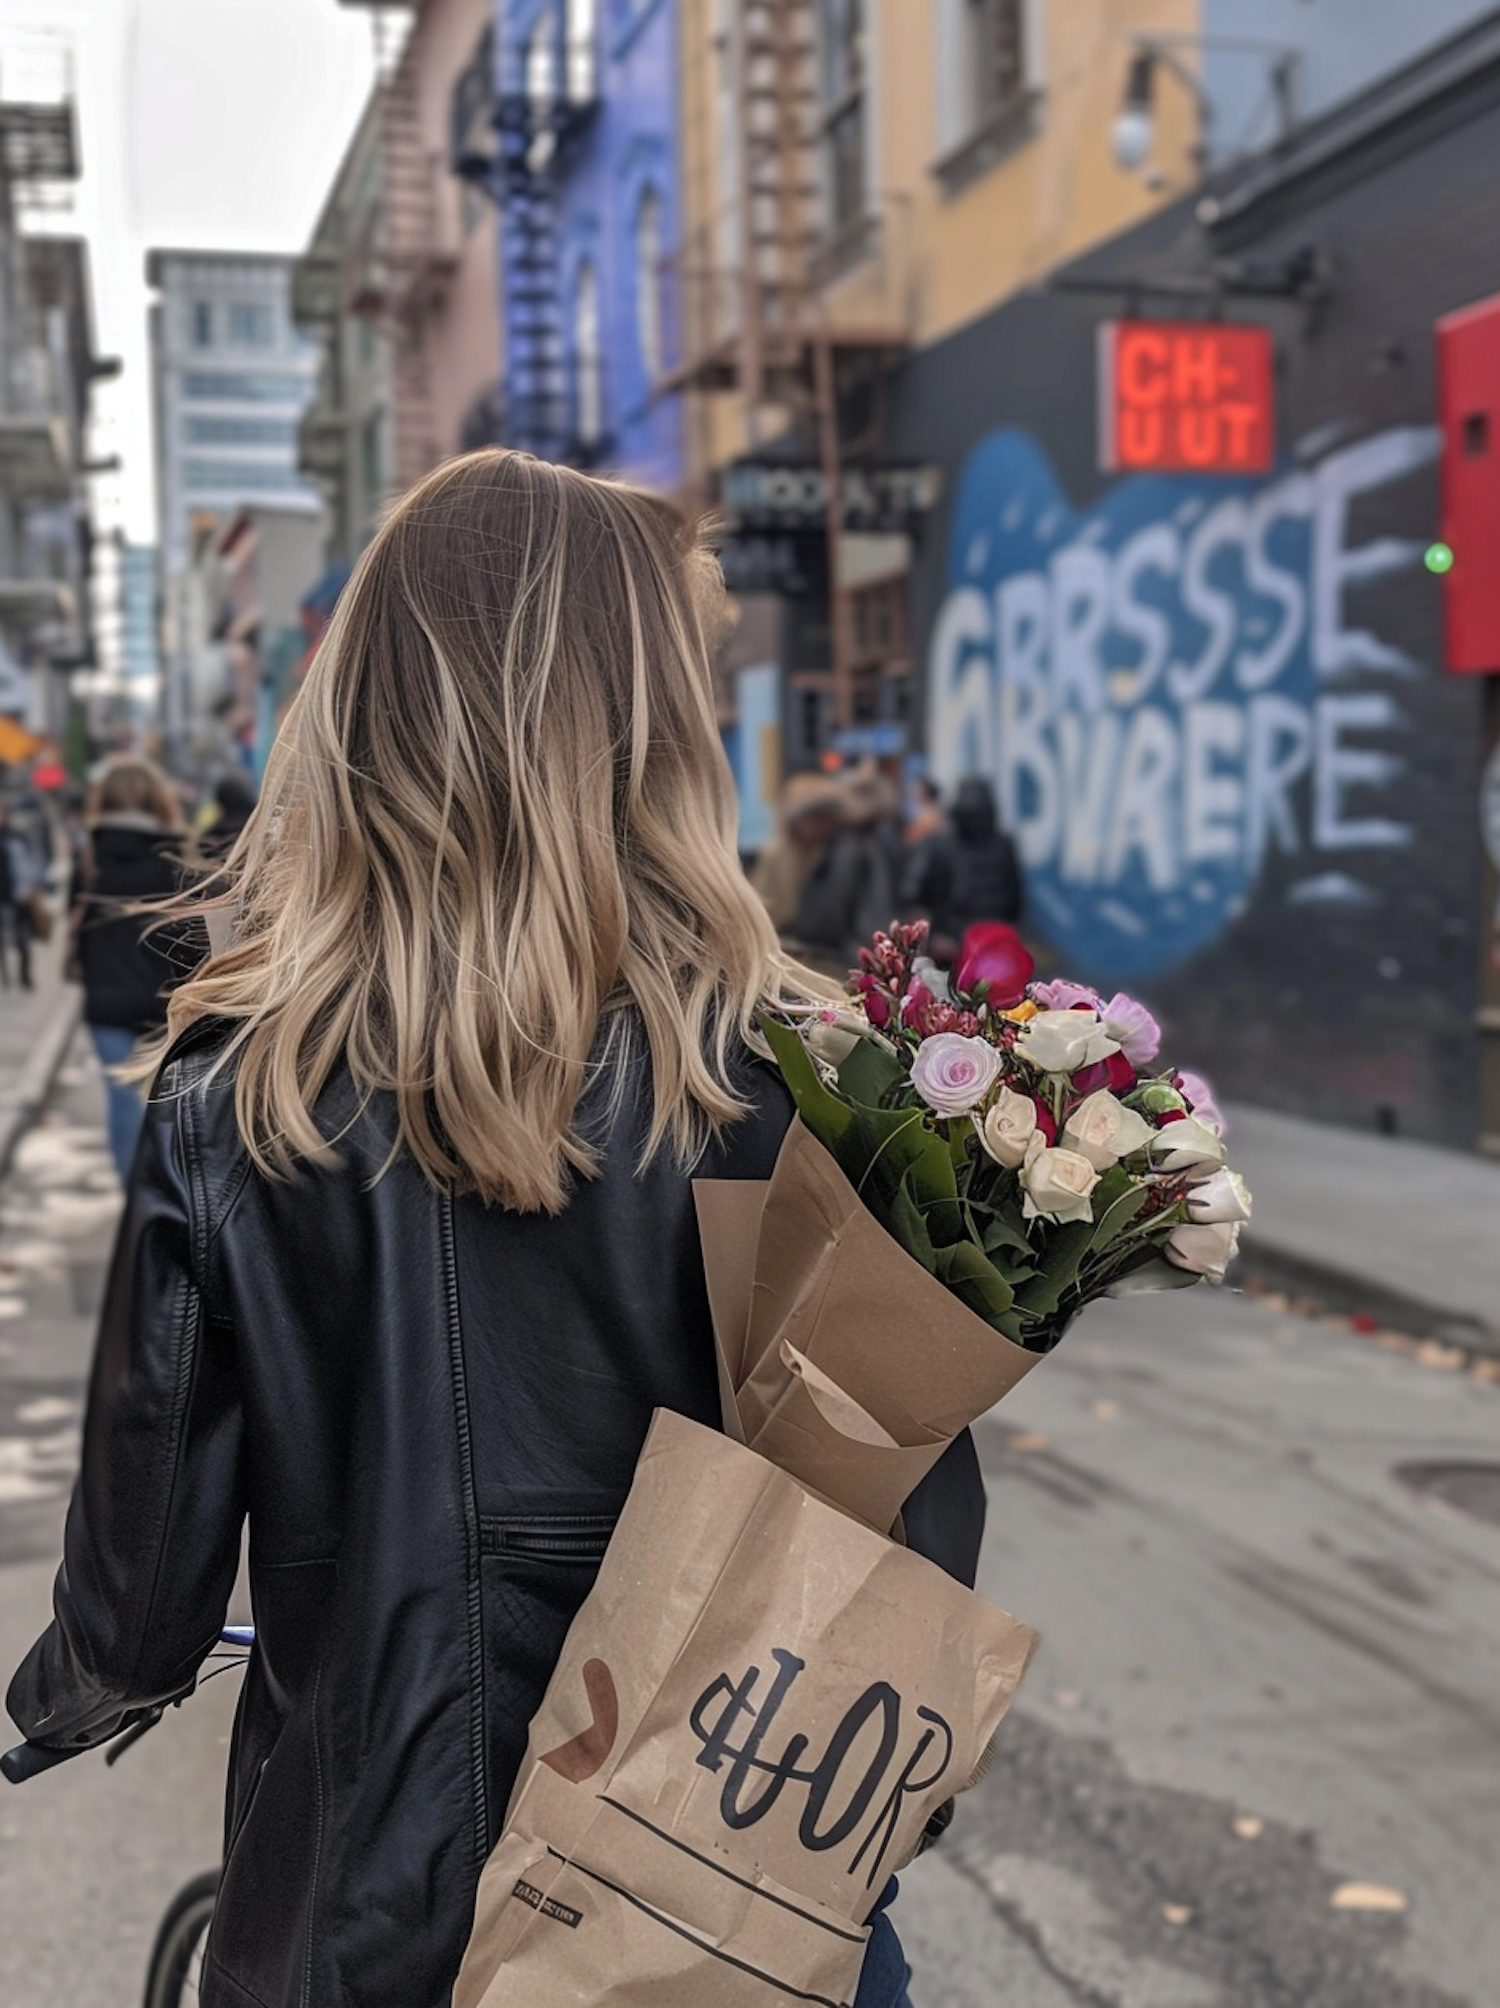 Woman Walking in City with Bouquet